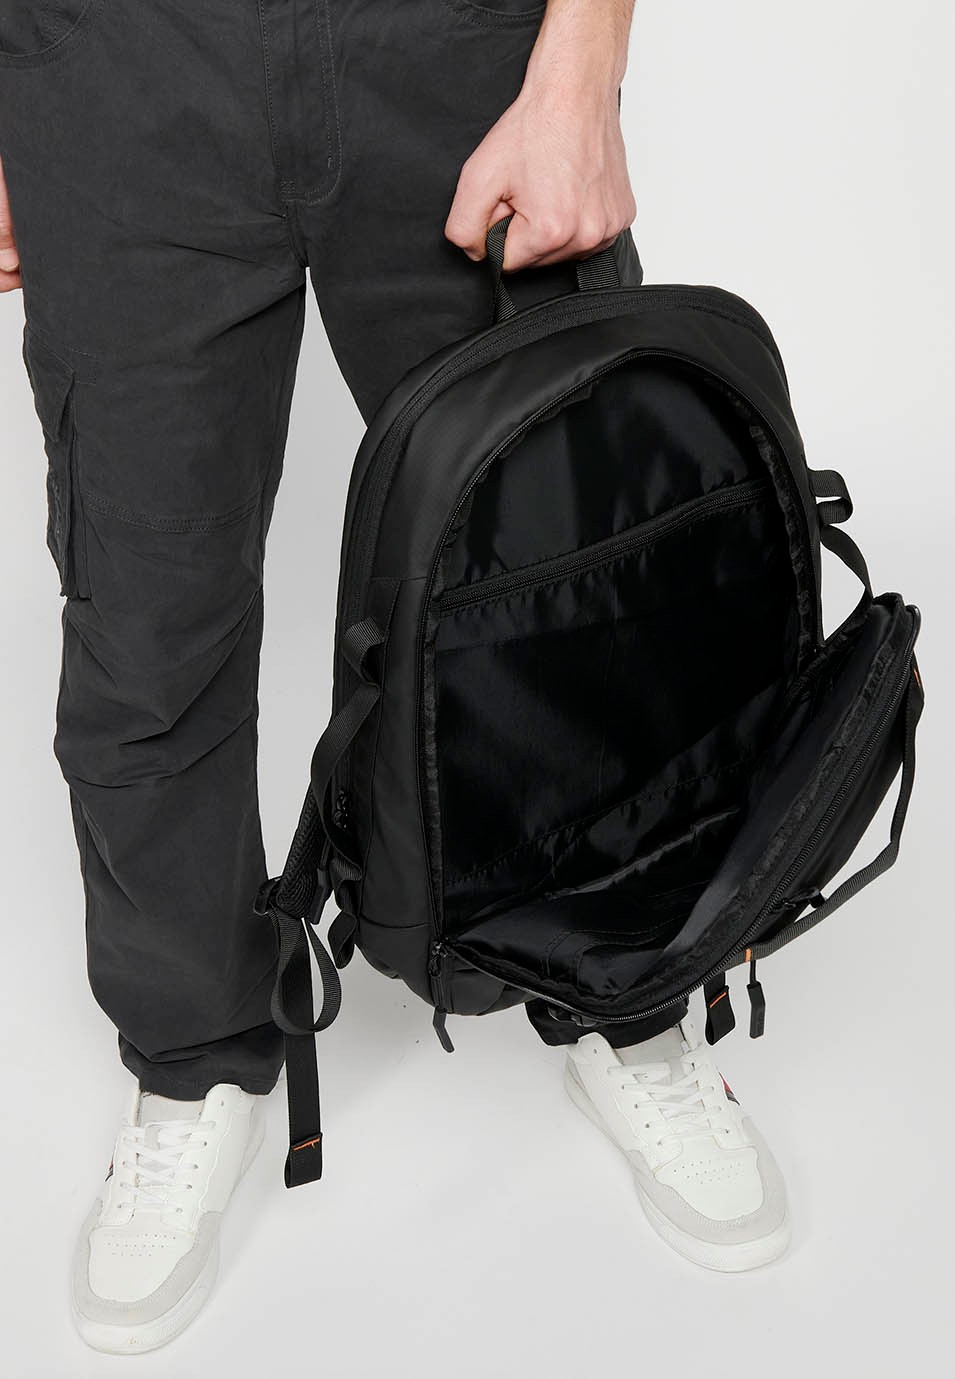 Koröshi backpack with two zippered compartments, one for a laptop and adjustable straps in Black 7